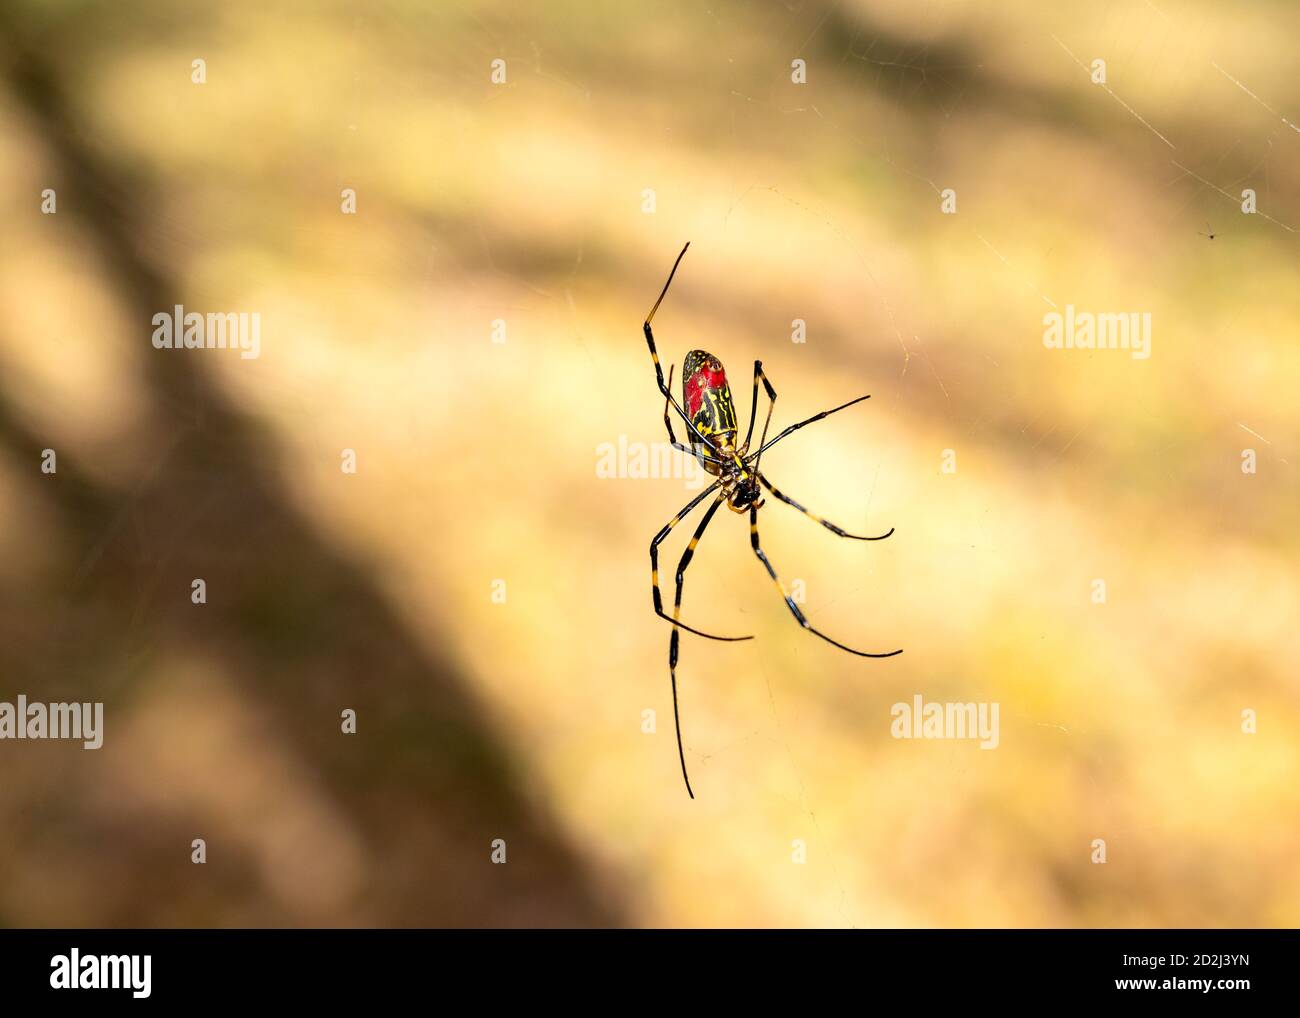 Close-up of a Japanese Joro spider moving across his web. Shallow DOF image taken in Asia. Stock Photo